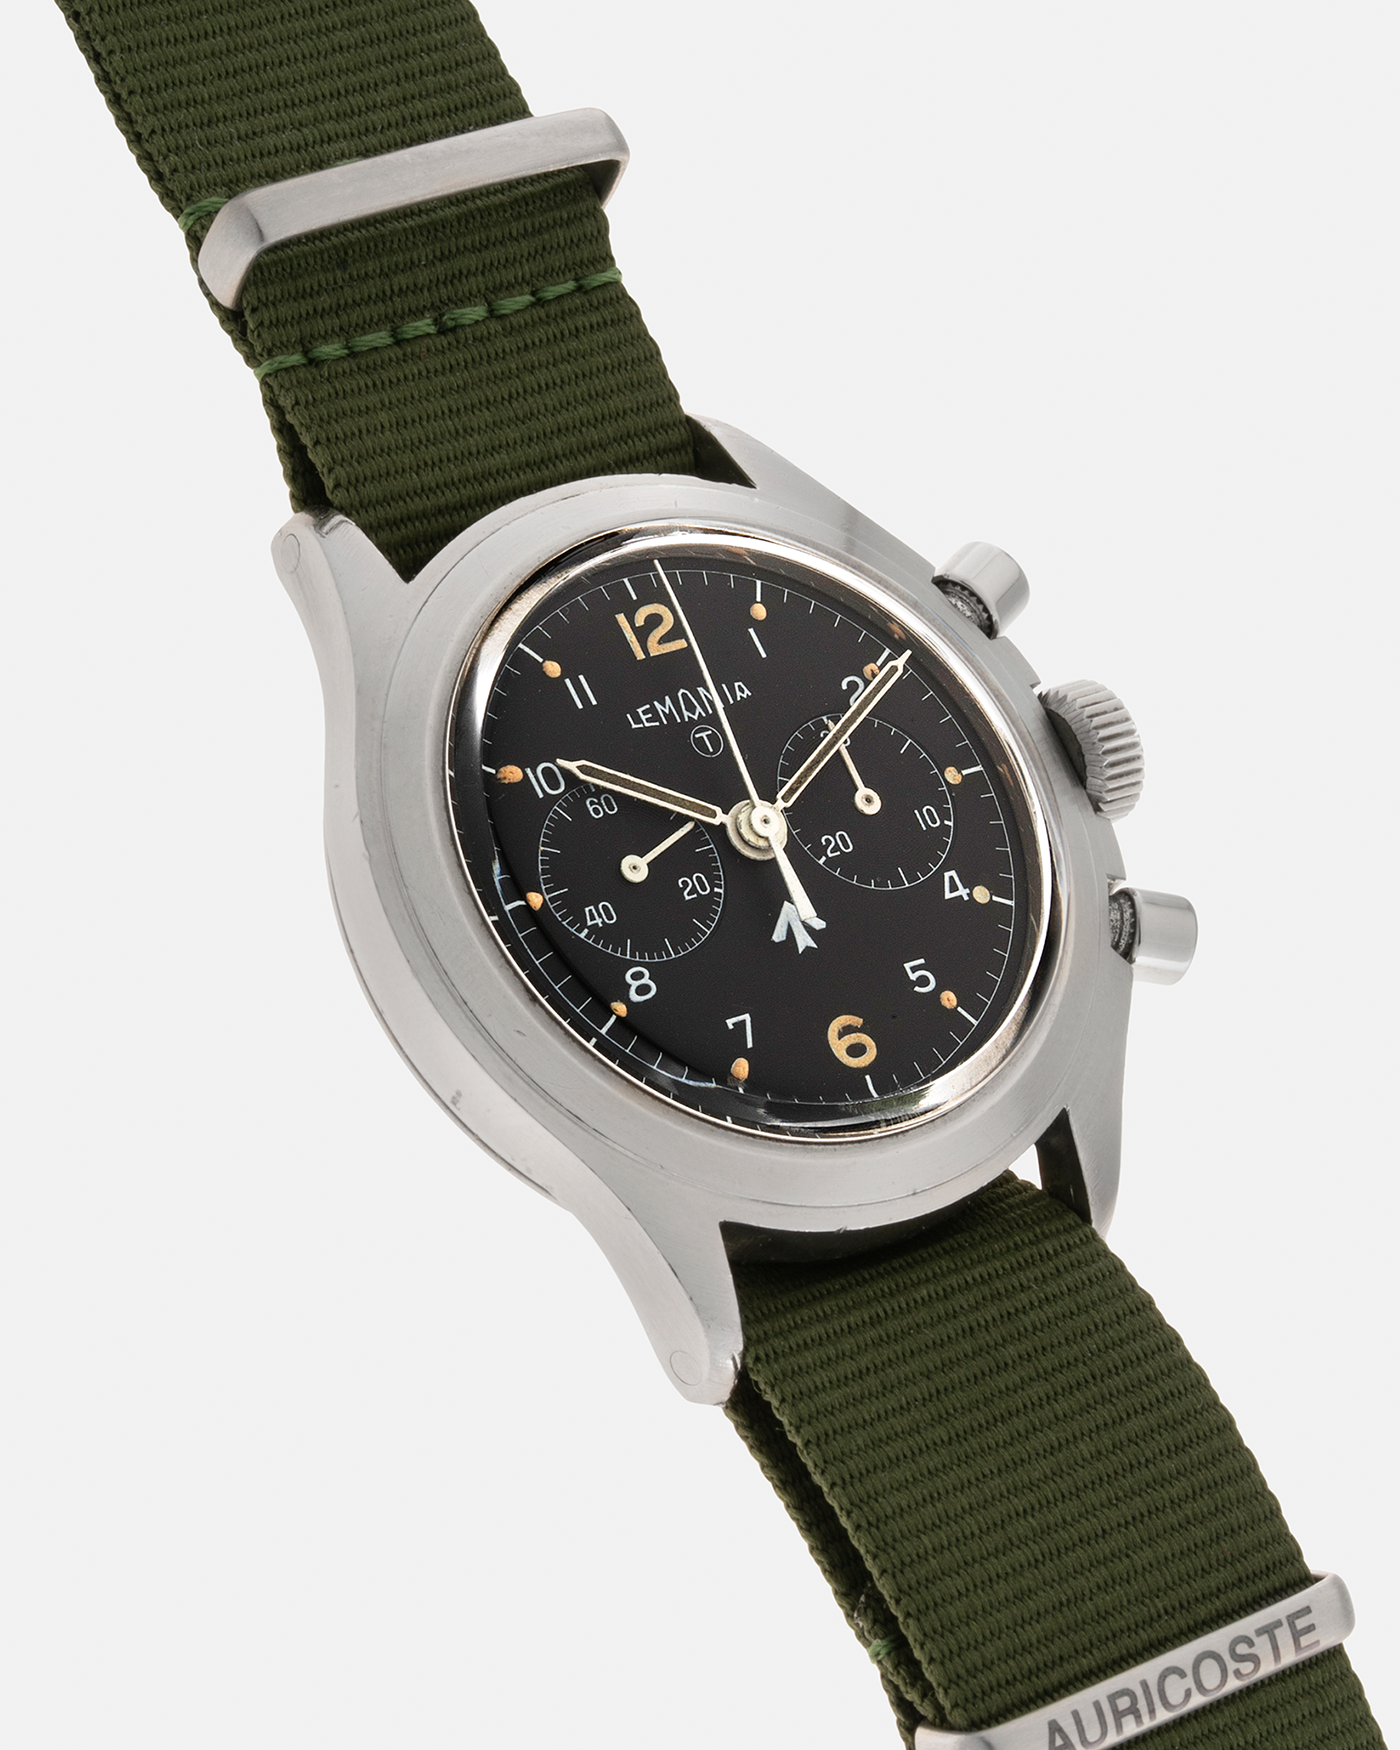 Brand: Lemania Year: 1975 Model: ‘Double Pusher’ Royal Navy Chronograph, Estimated 500 pieces only Reference Number: 818 Material: Stainless Steel Movement: Lemania 2220, Manual-Winding Case Diameter: 40mm Lug Width: 20mm Strap: Auricoste Military Green NATO Strap